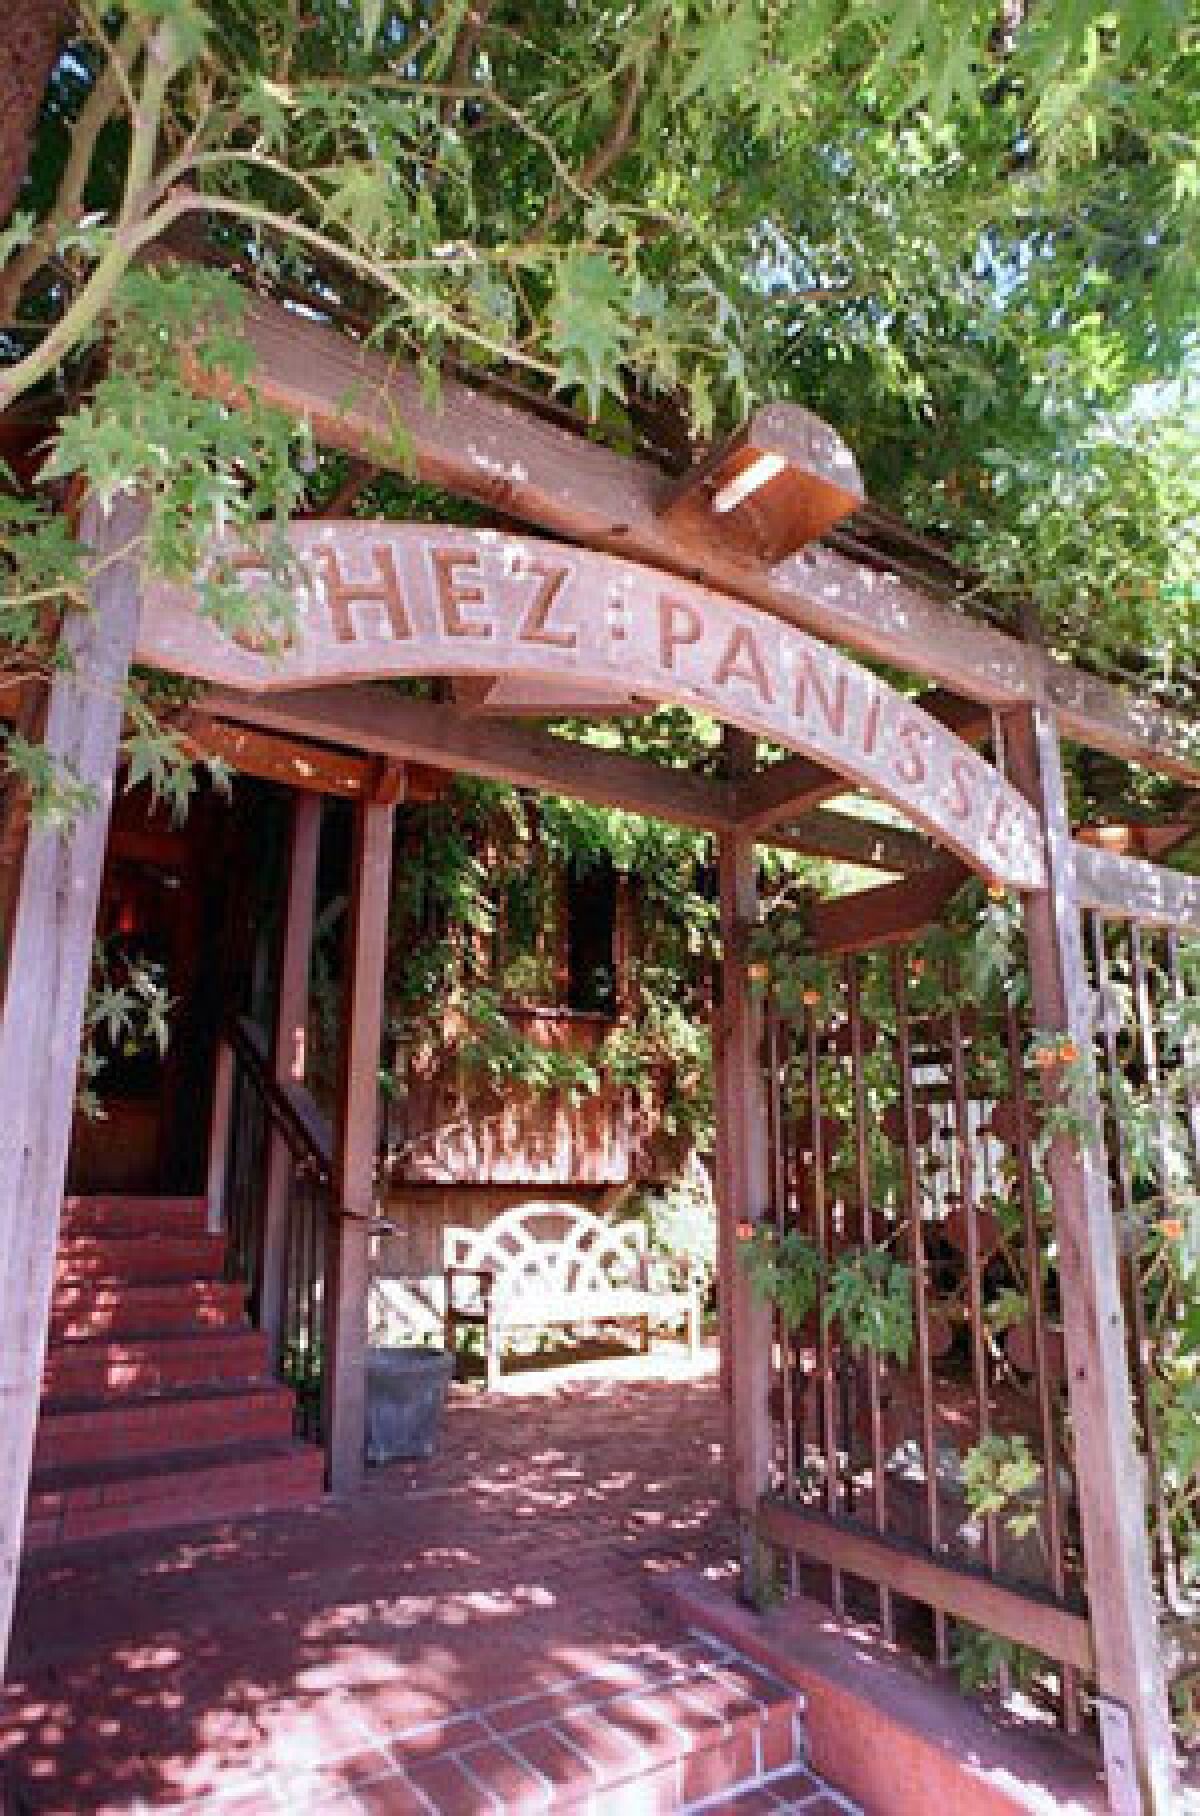 The highly regarded Chez Panisse in Berkeley is 40 years old.